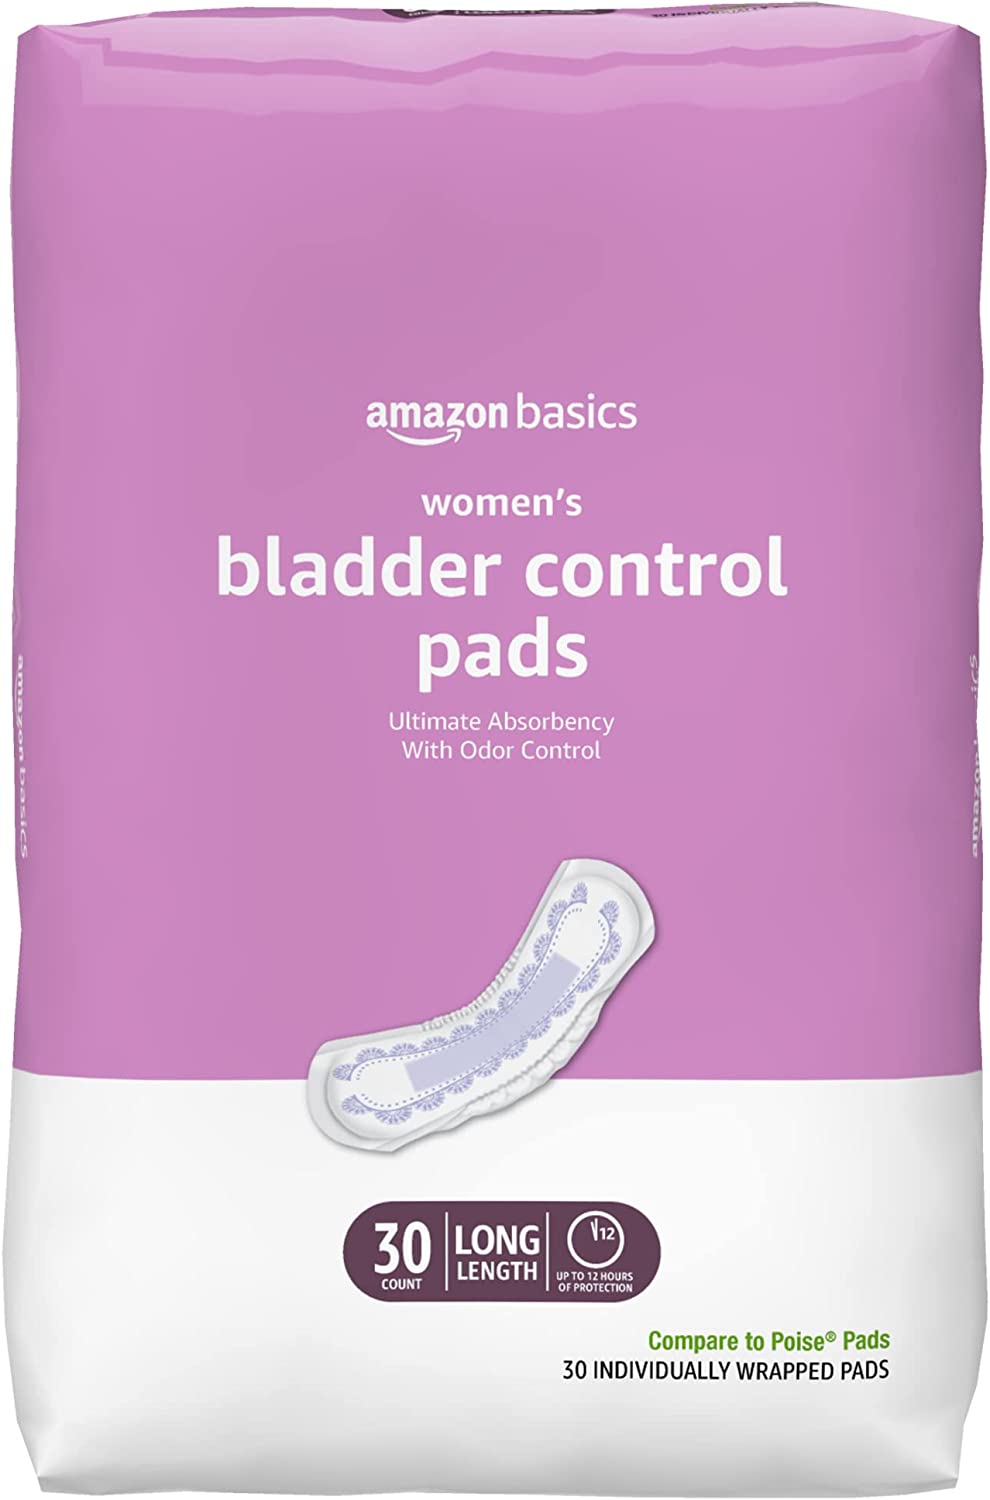 Amazon Basics Incontinence, Bladder Control & Postpartum Pads for Women, Ultimate Absorbency, Long Length, 30 Count, 1 Pack (Previously Solimo)